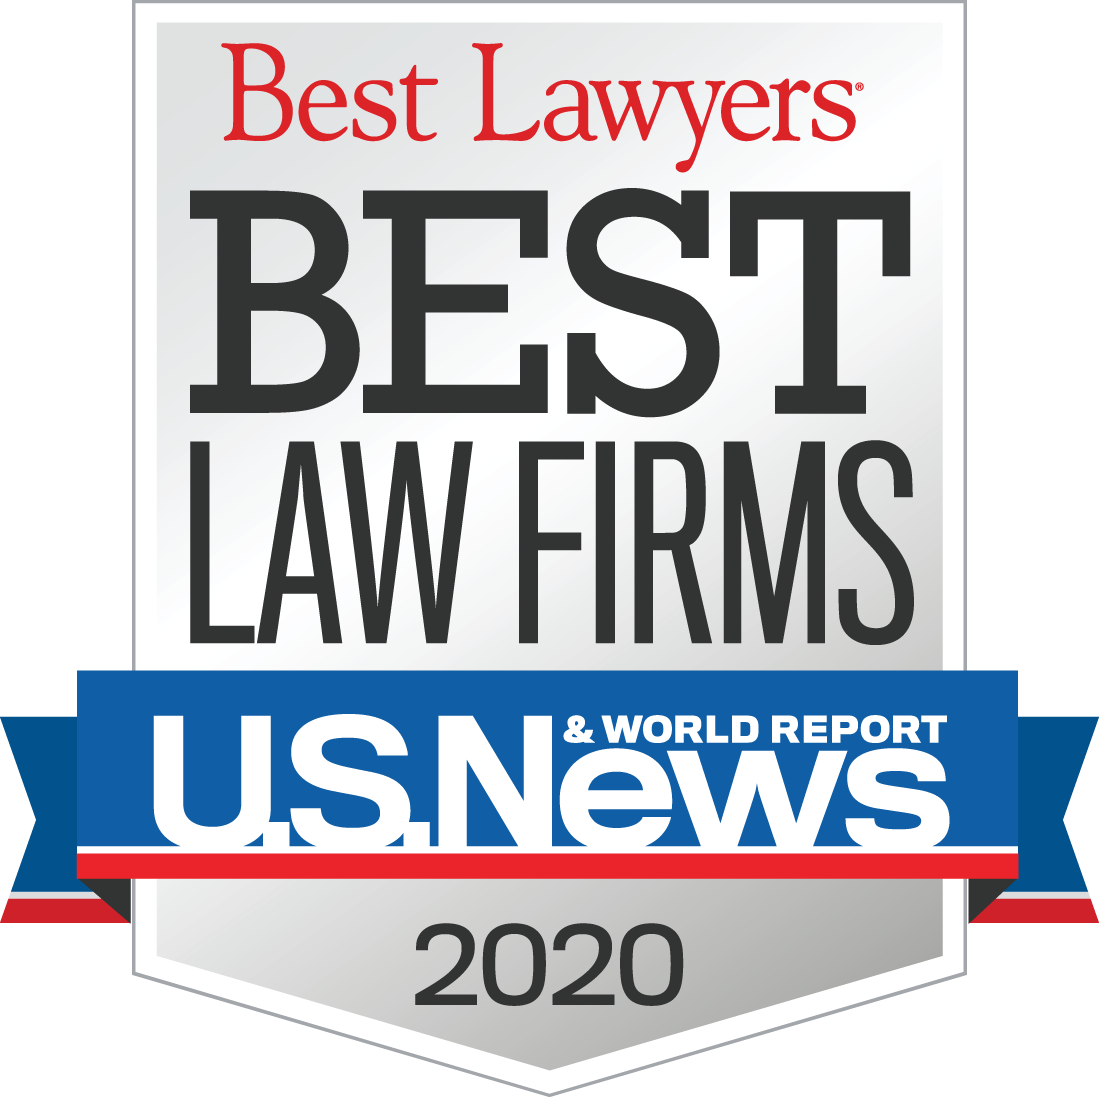 2020 Best Law Firms